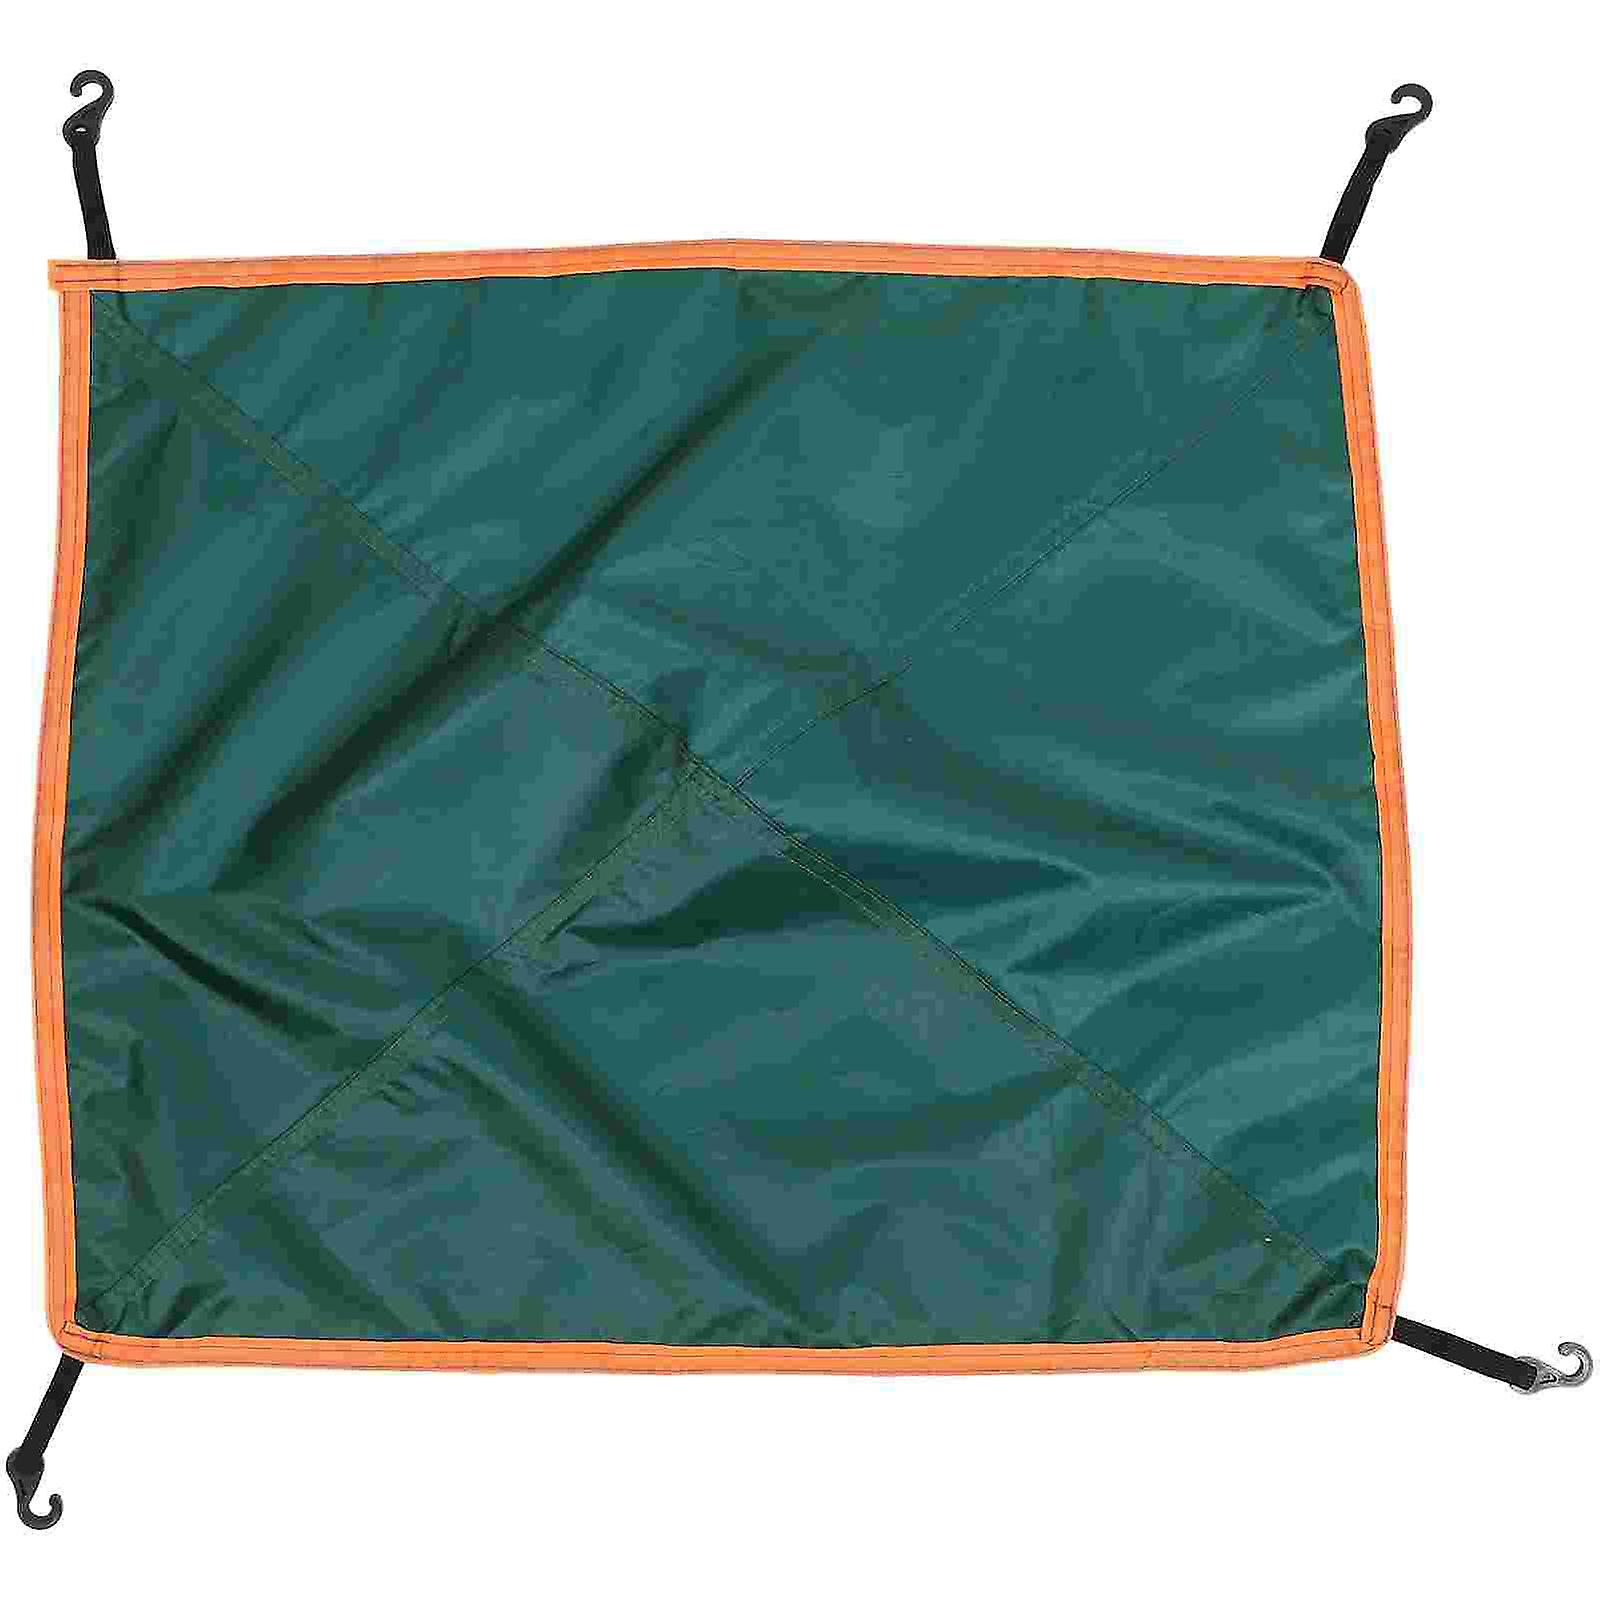 Professional Waterproof Rain Fly For Tent   Portable Outdoor Shelter And Sunshade Cover